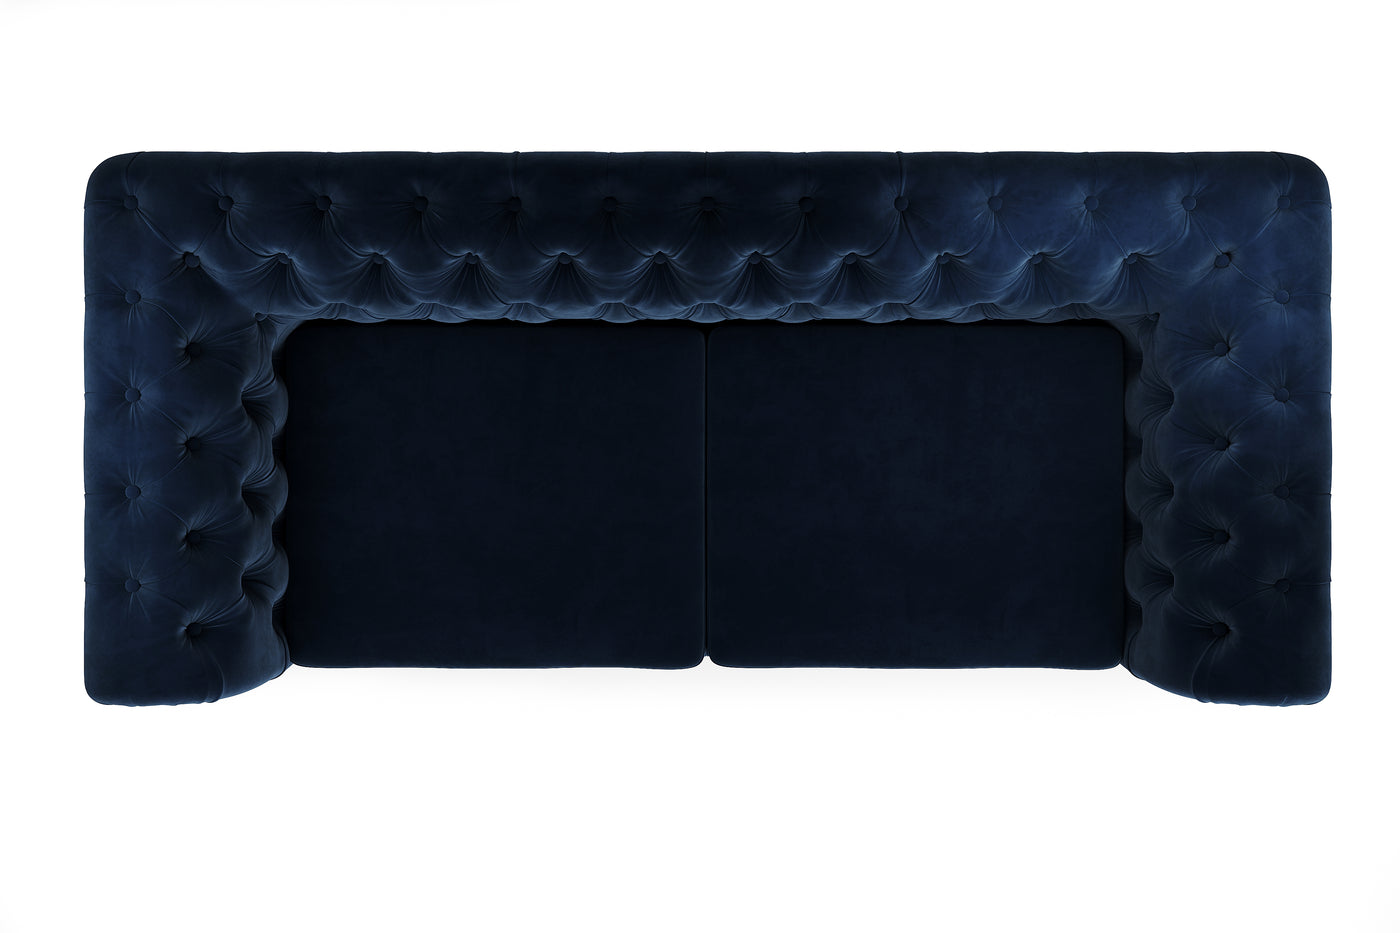 Navy Blue 3 Seater Chesterfield Sofa 